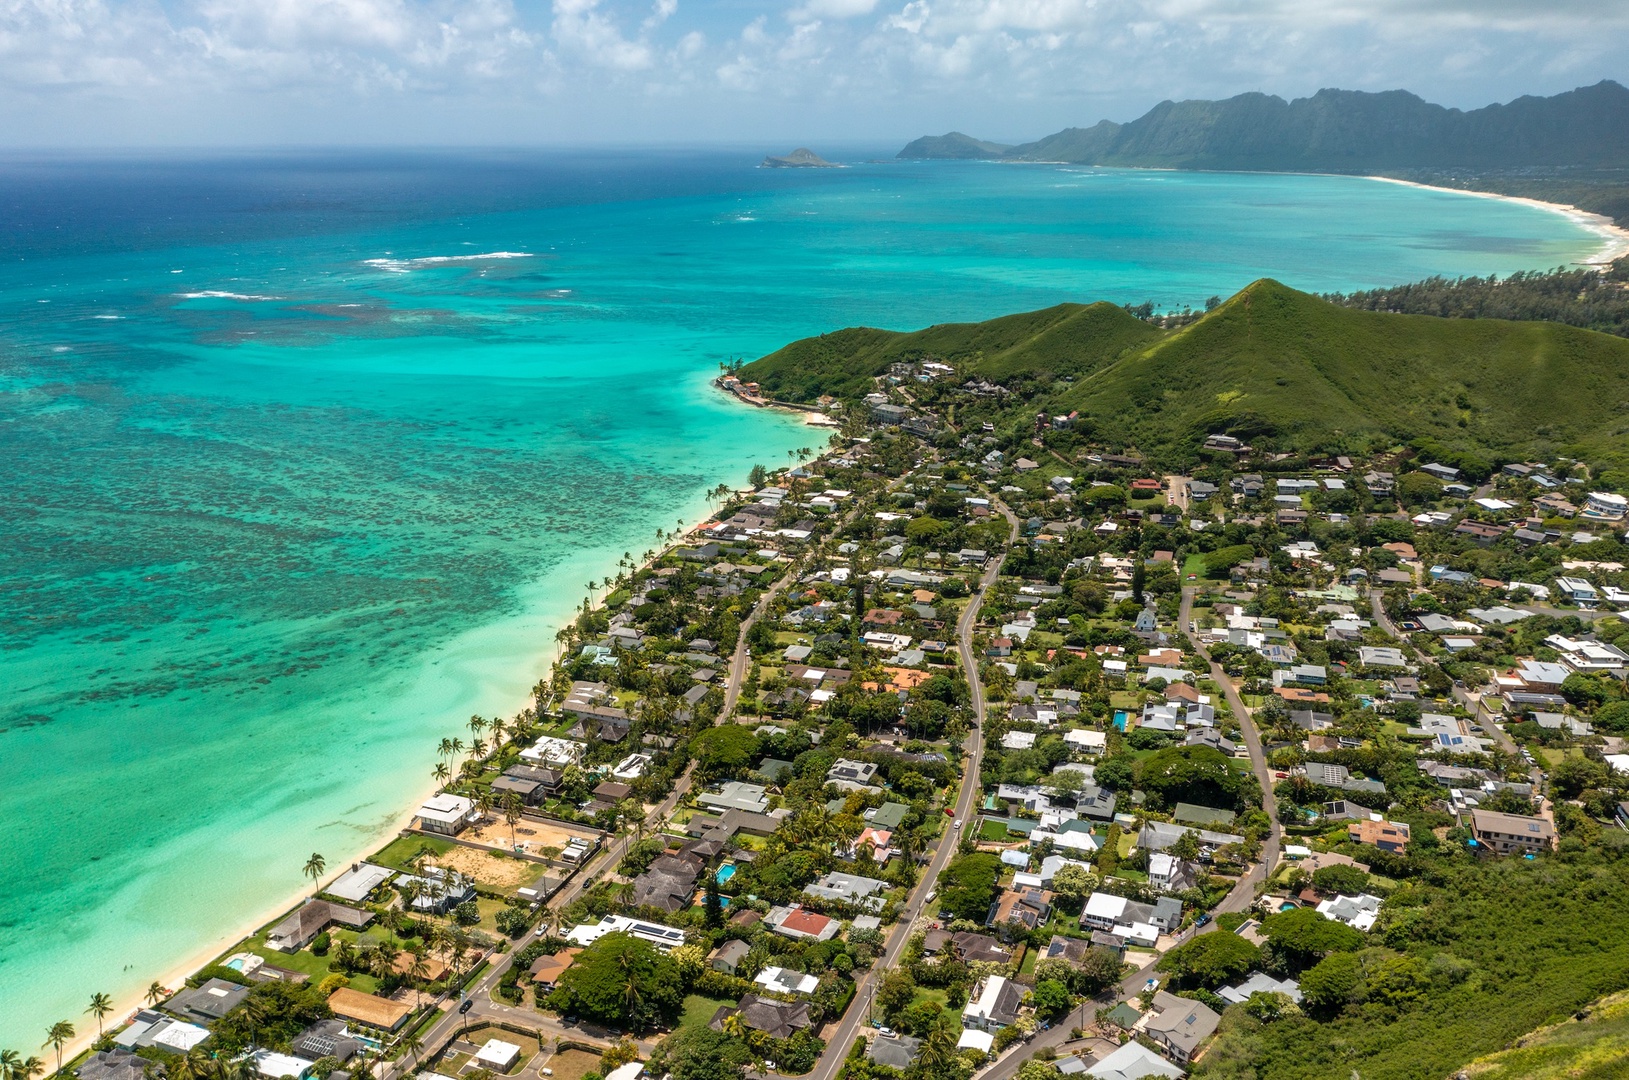 Kailua Vacation Rentals, Mokulua Seaside - Aerial shot of the beach with turquoise blue waters